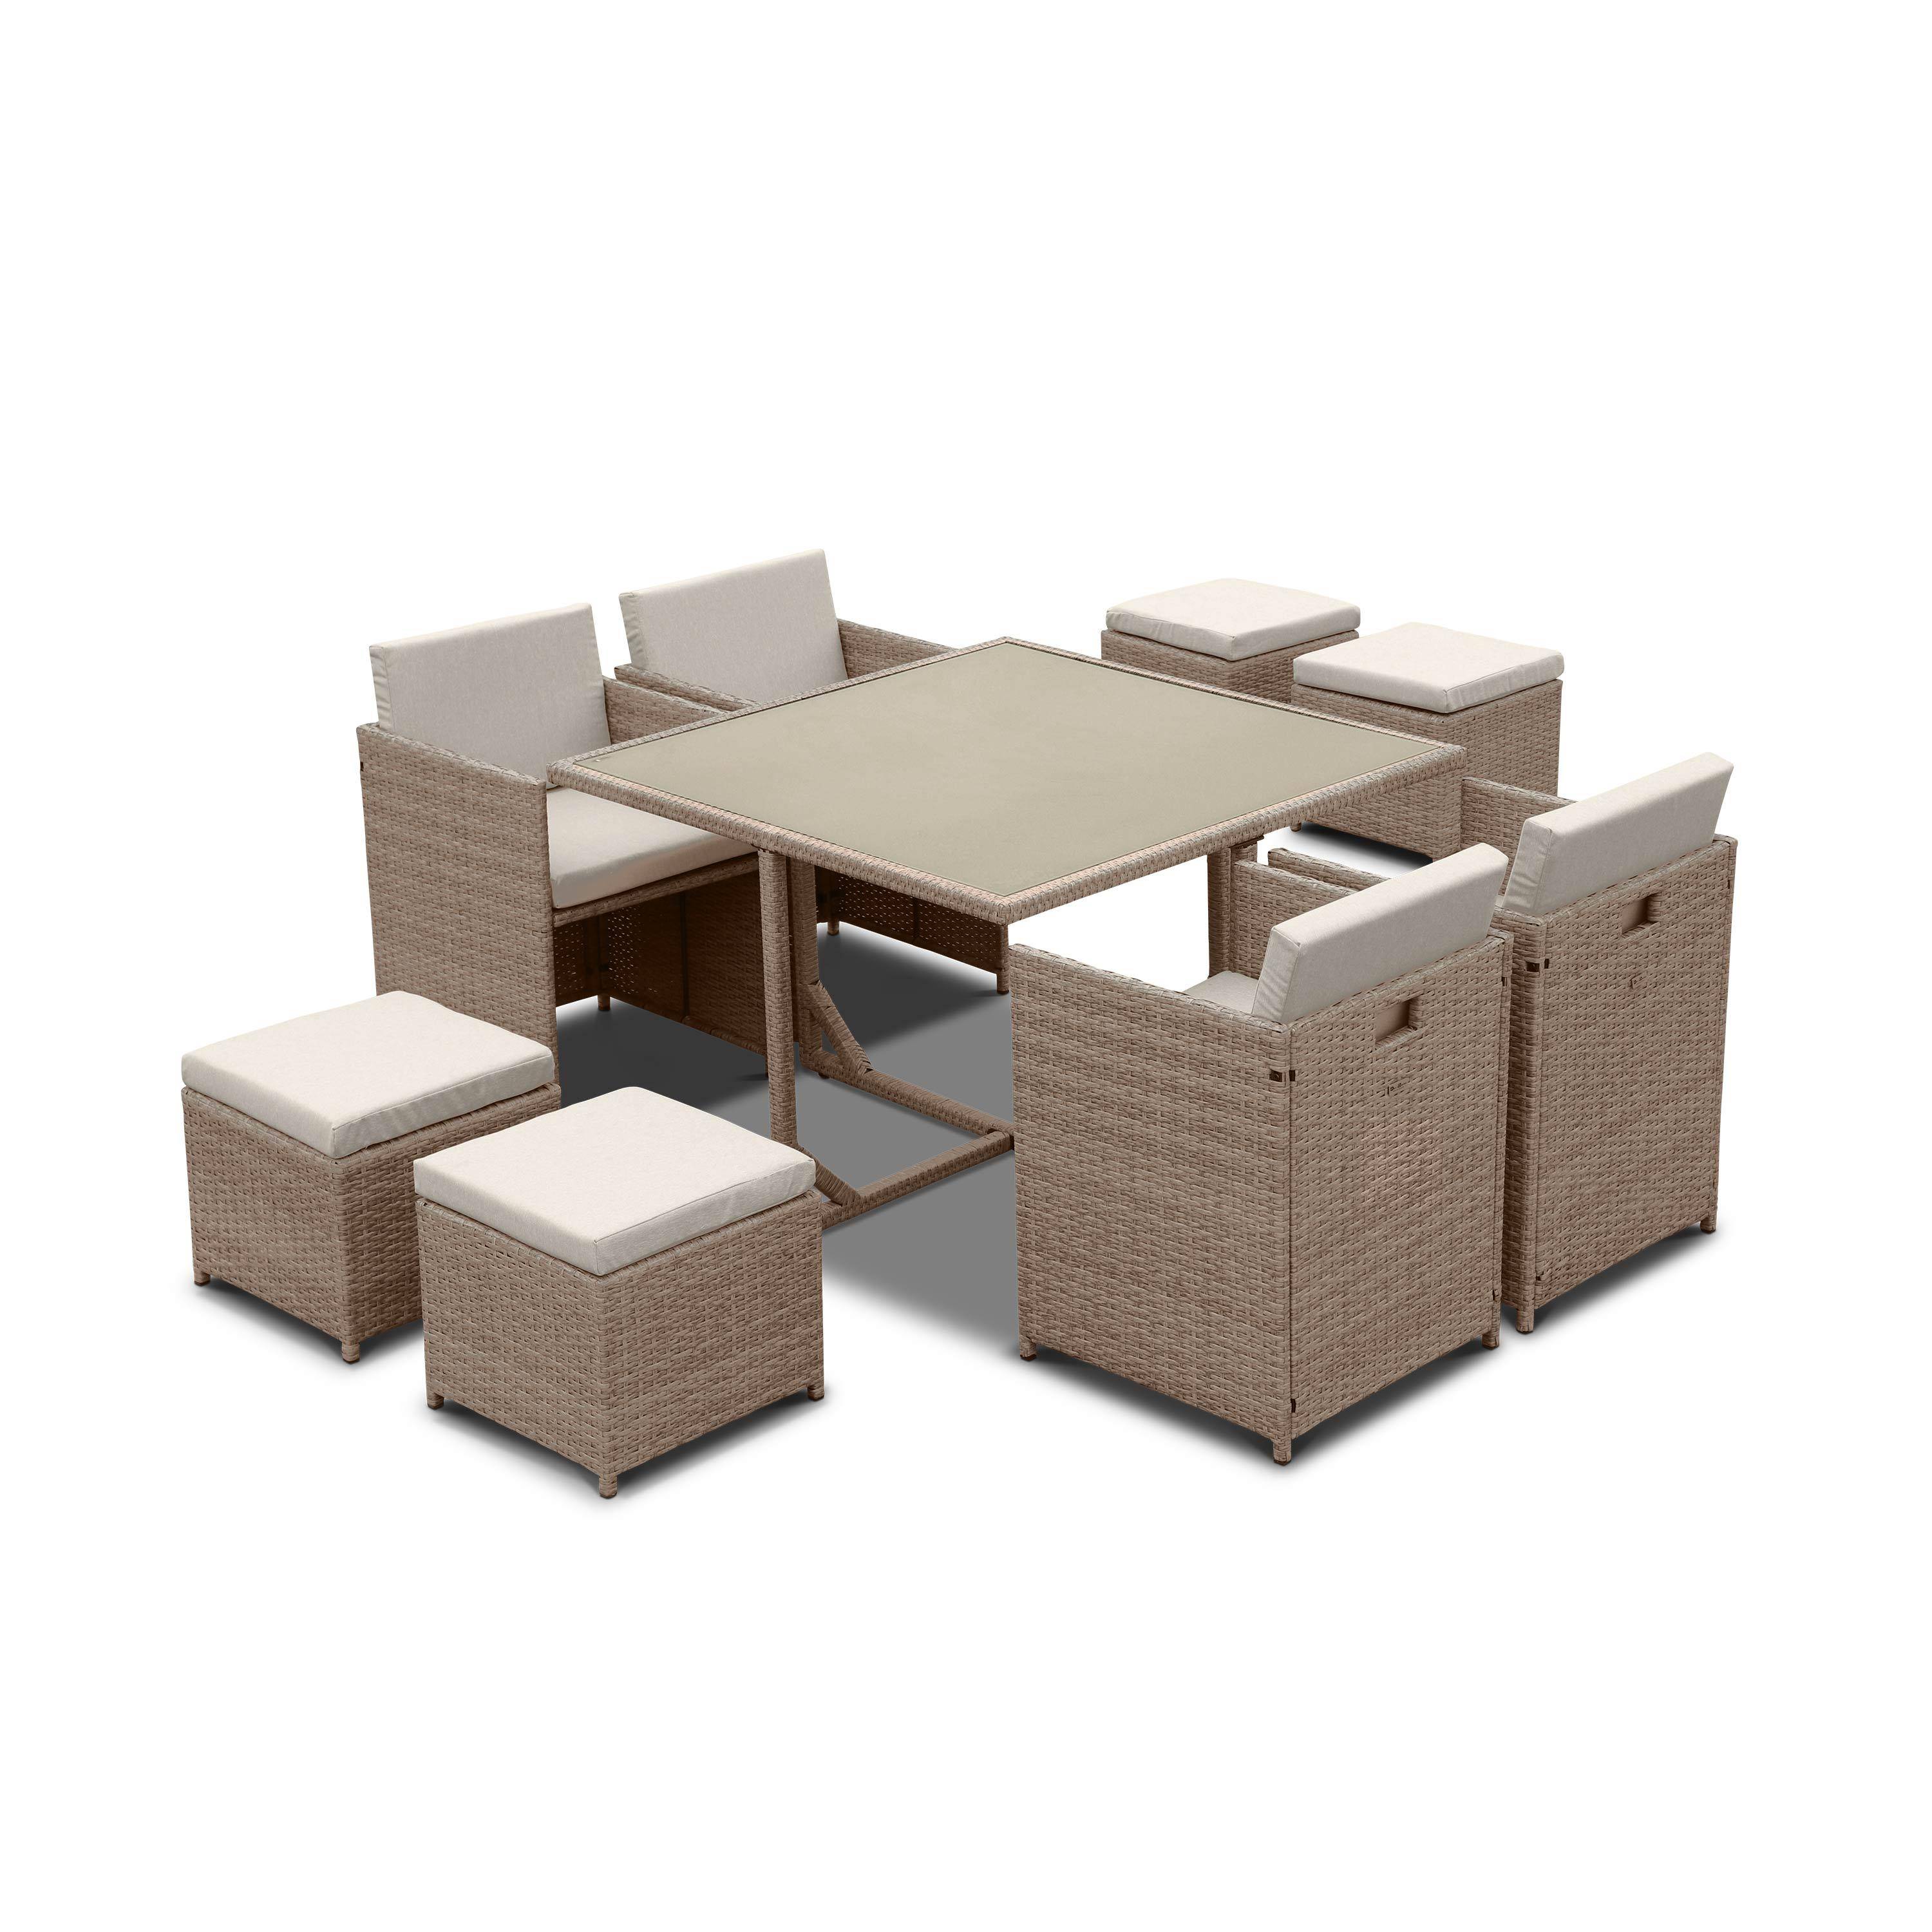 4 to 8-seater rattan cube table set - table, 4 armchairs, 4 footstools - Vabo 8 - Natural rattan, Beige cushions,sweeek,Photo2